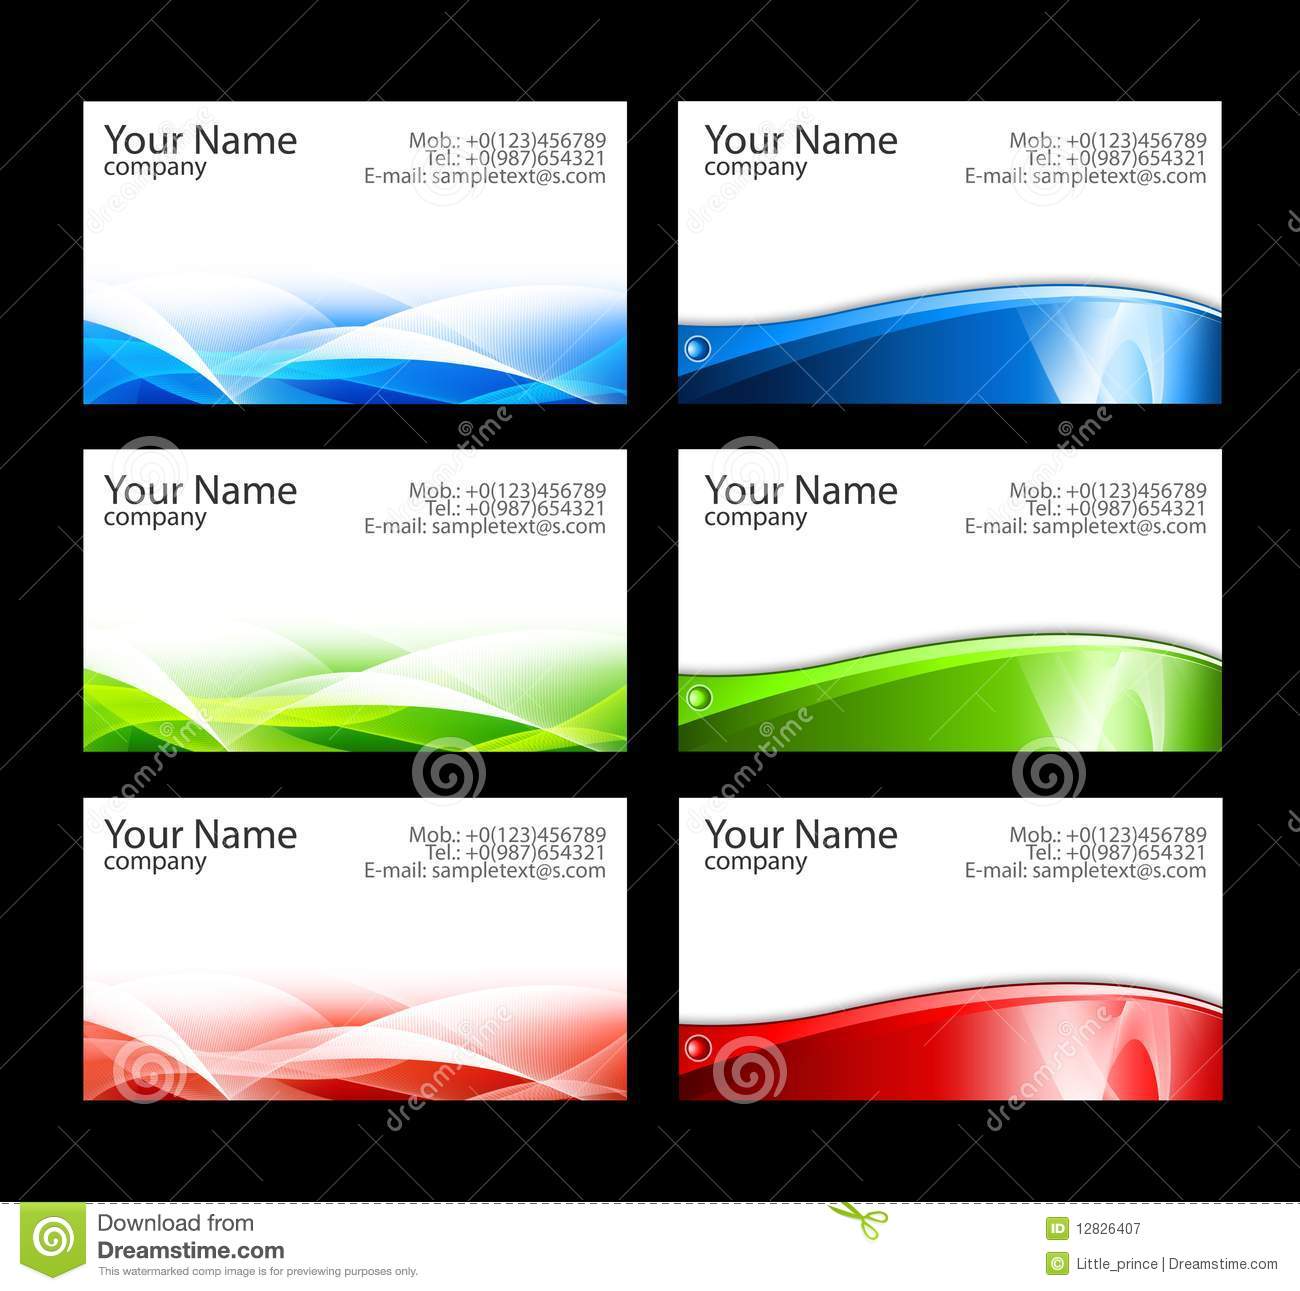 8-avery-blank-business-card-templates-images-avery-business-cards